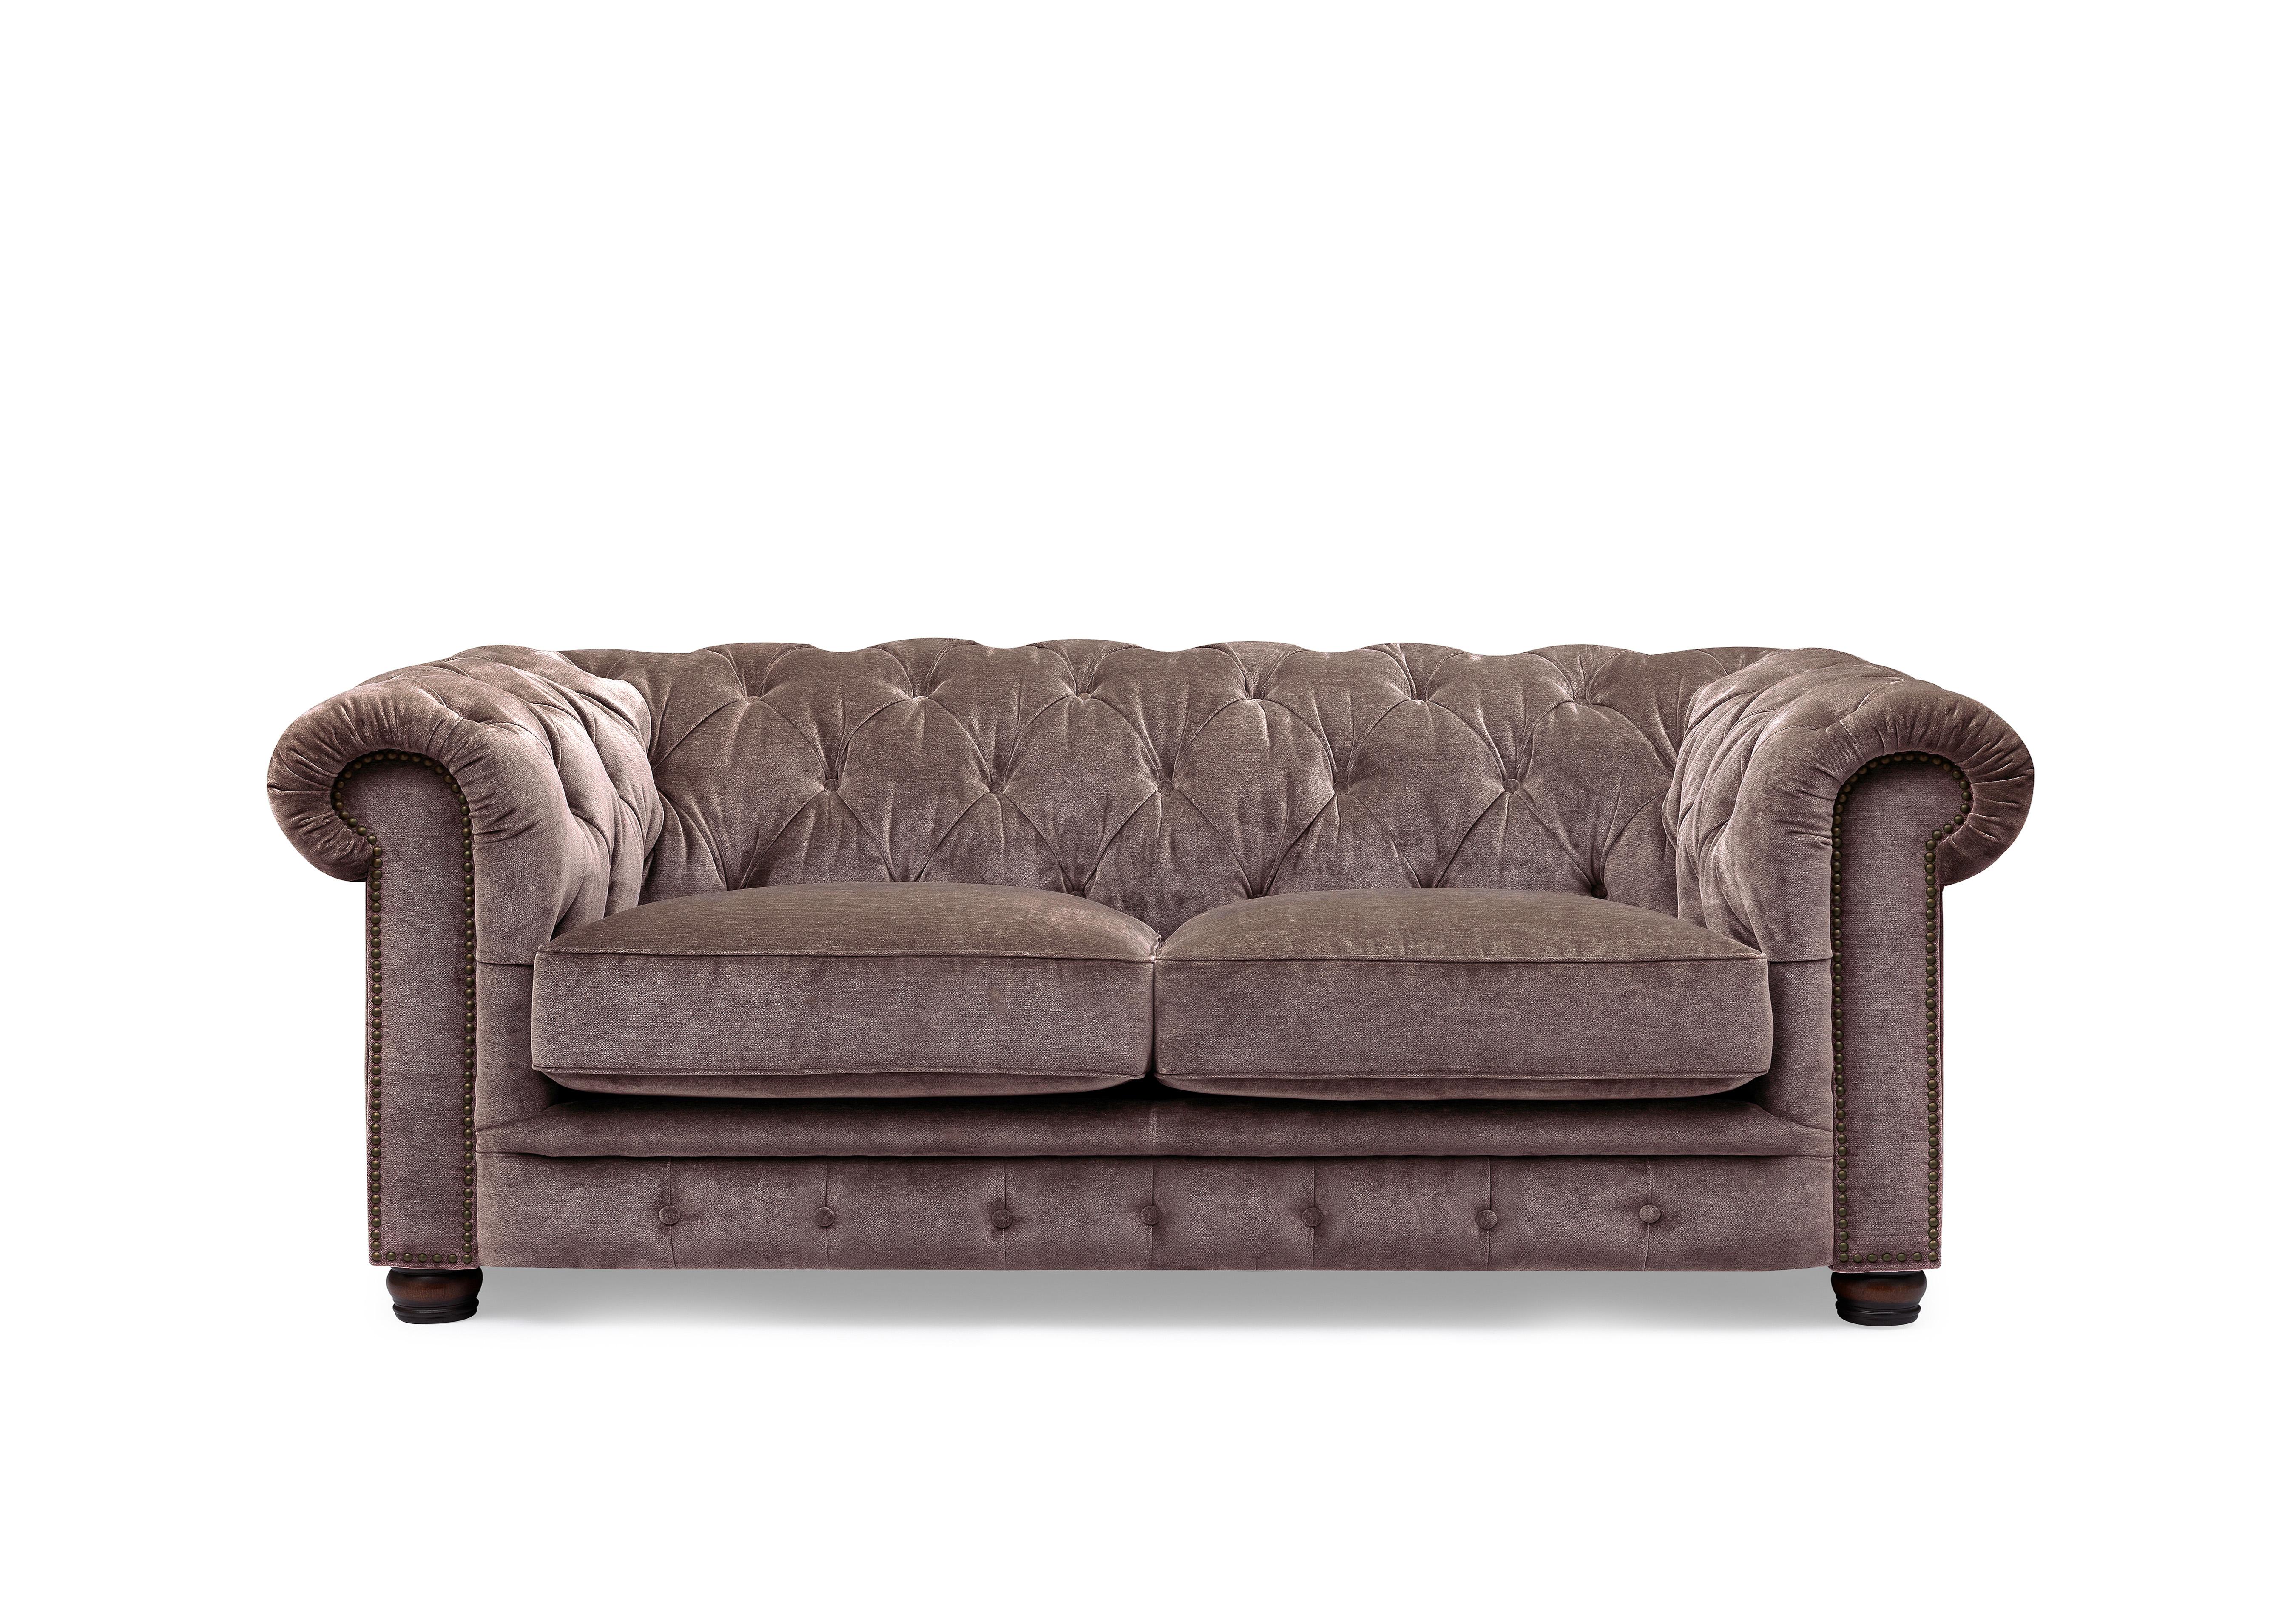 Shackleton 3 Seater Fabric Chesterfield Sofa in X3y1-W023 Antler on Furniture Village